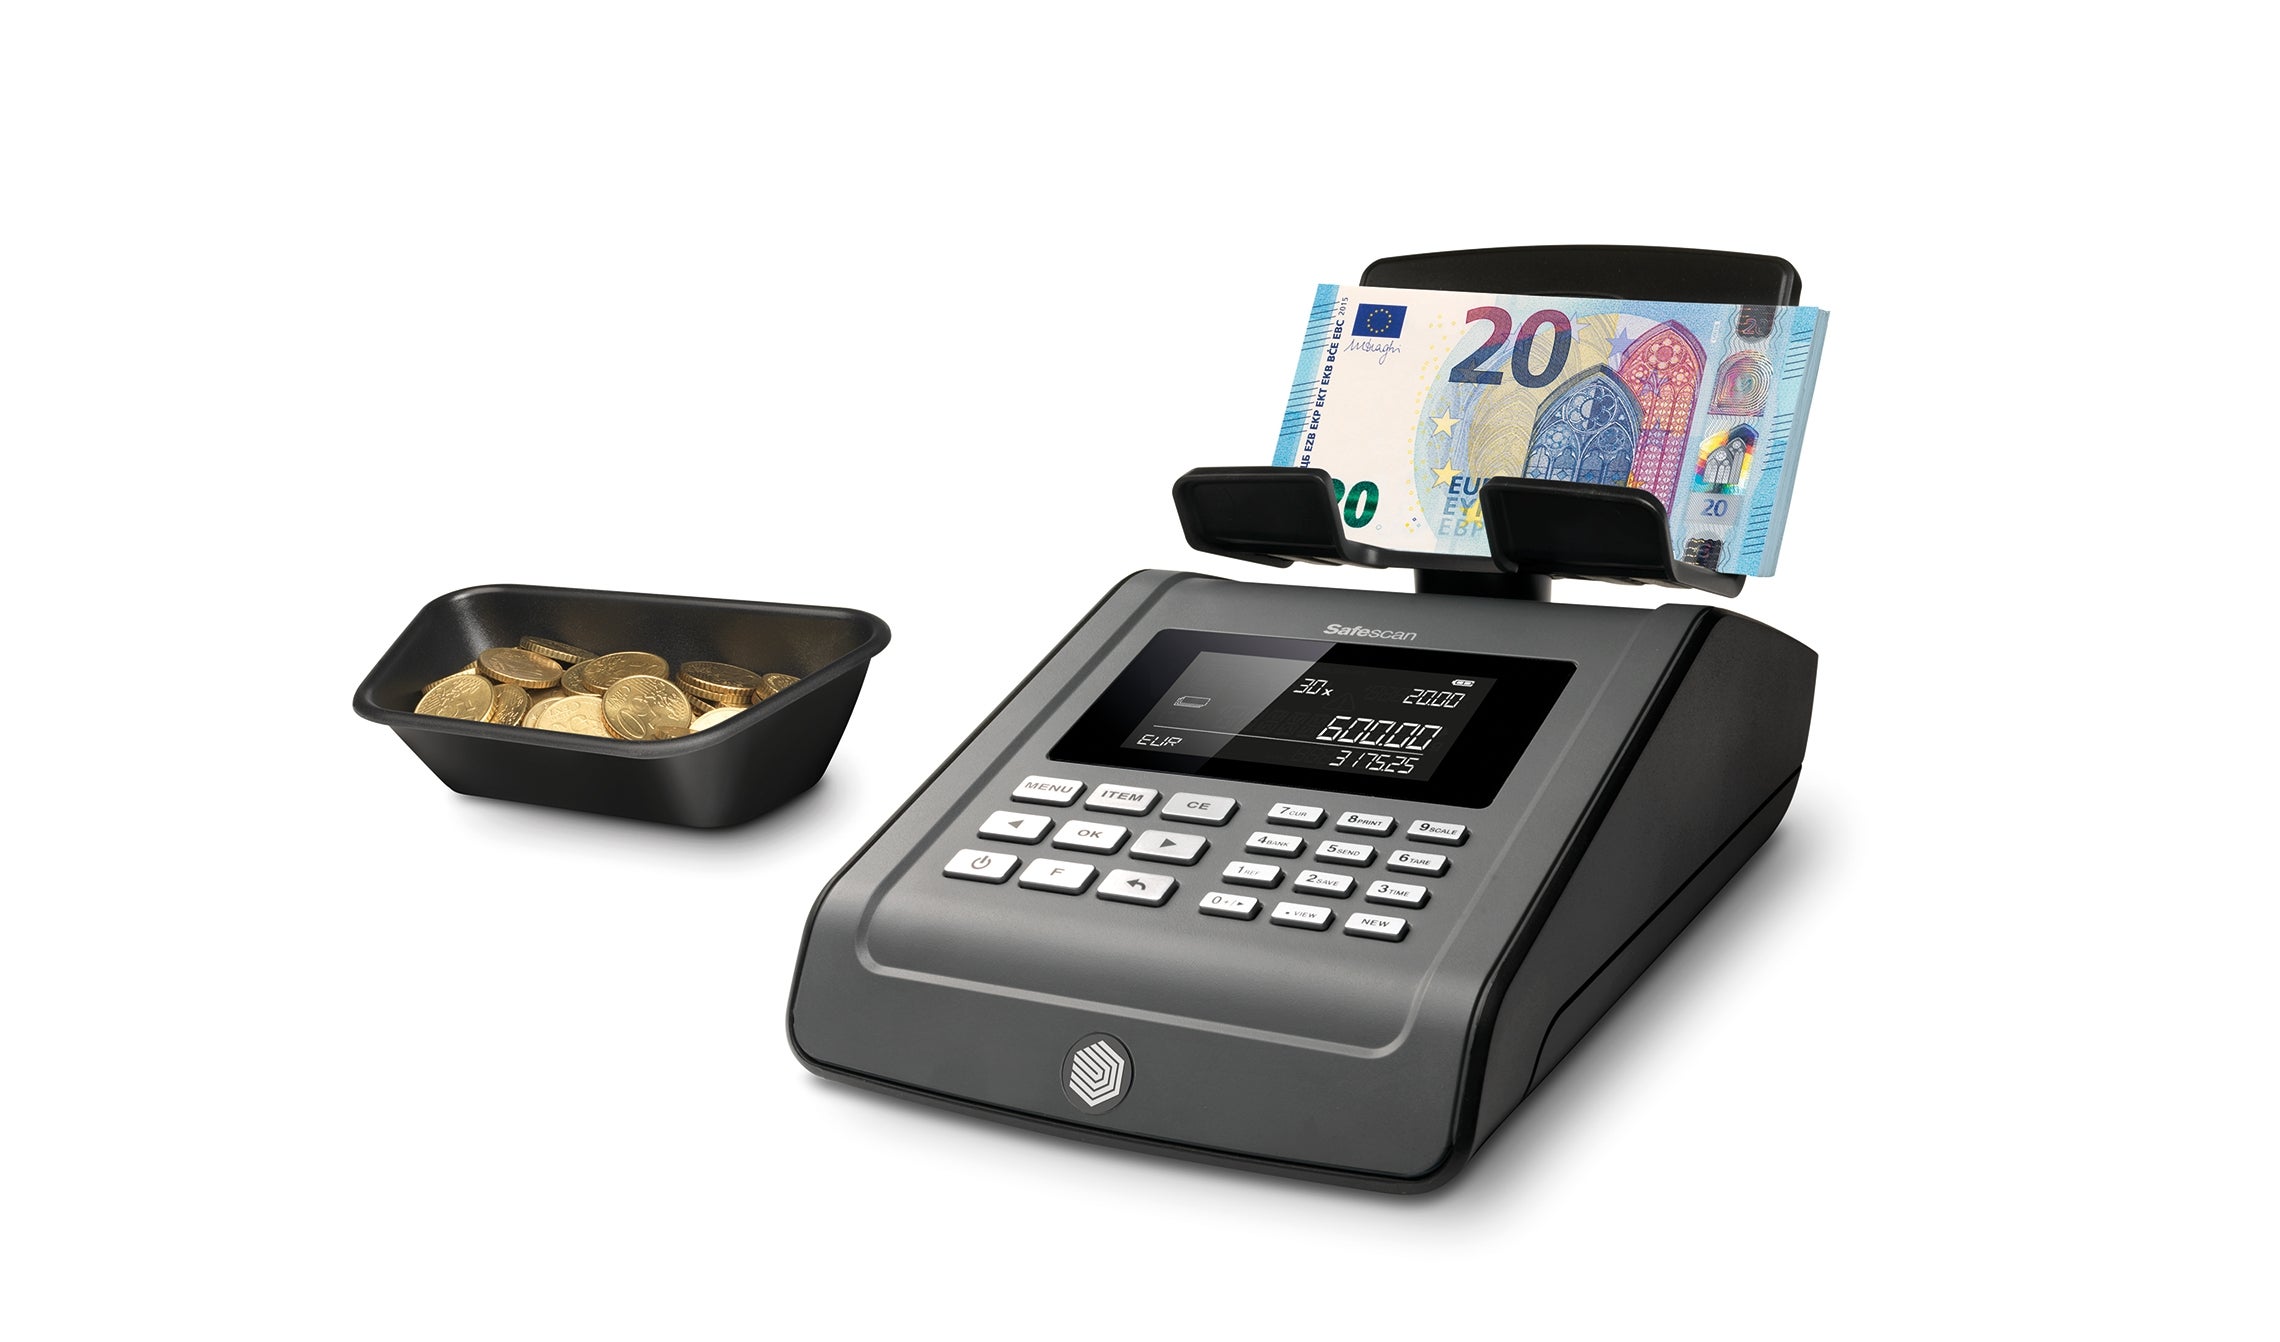 safescan-6185-coin-and-banknote-counter